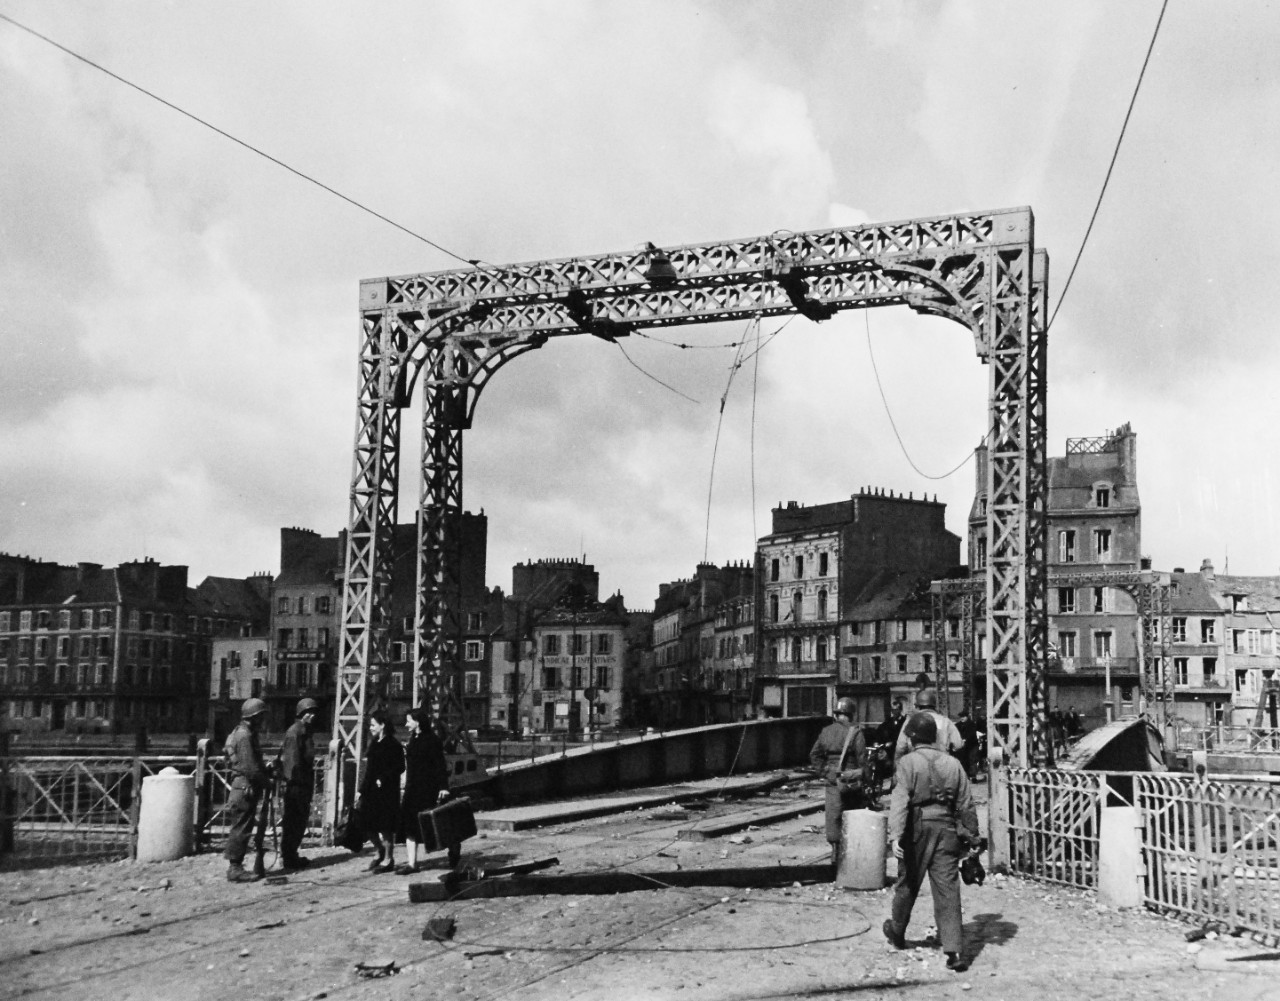 80-G-255915:    Normandy Invasion, Cherbourg, France, July 1944.   French civilians pass over damaged bridge to return to their homes in Cherbourg, France, after its liberation by Allies. The Army engineers move into the town at right.  Photograph received October 28, 1944.   Official U.S. Navy Photograph, now in the collections of the National Archives.   (2014/11/05). 